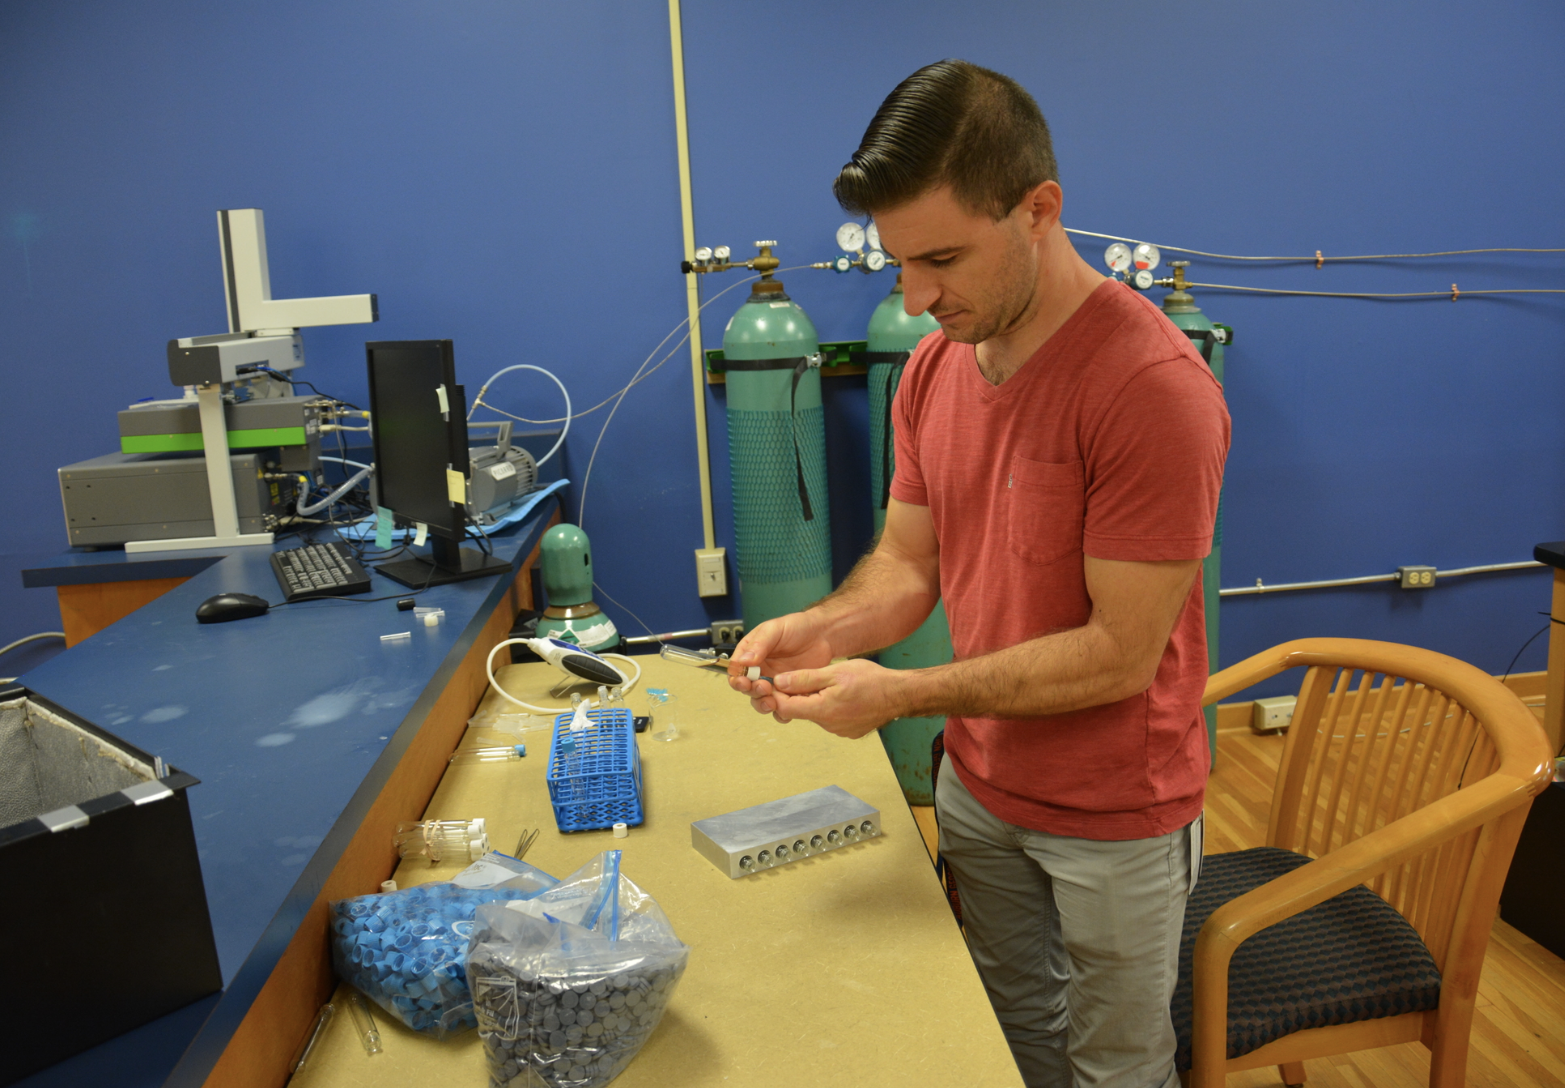 Dr. DeCesare acidifying samples for data collection in the mass spectrometer.